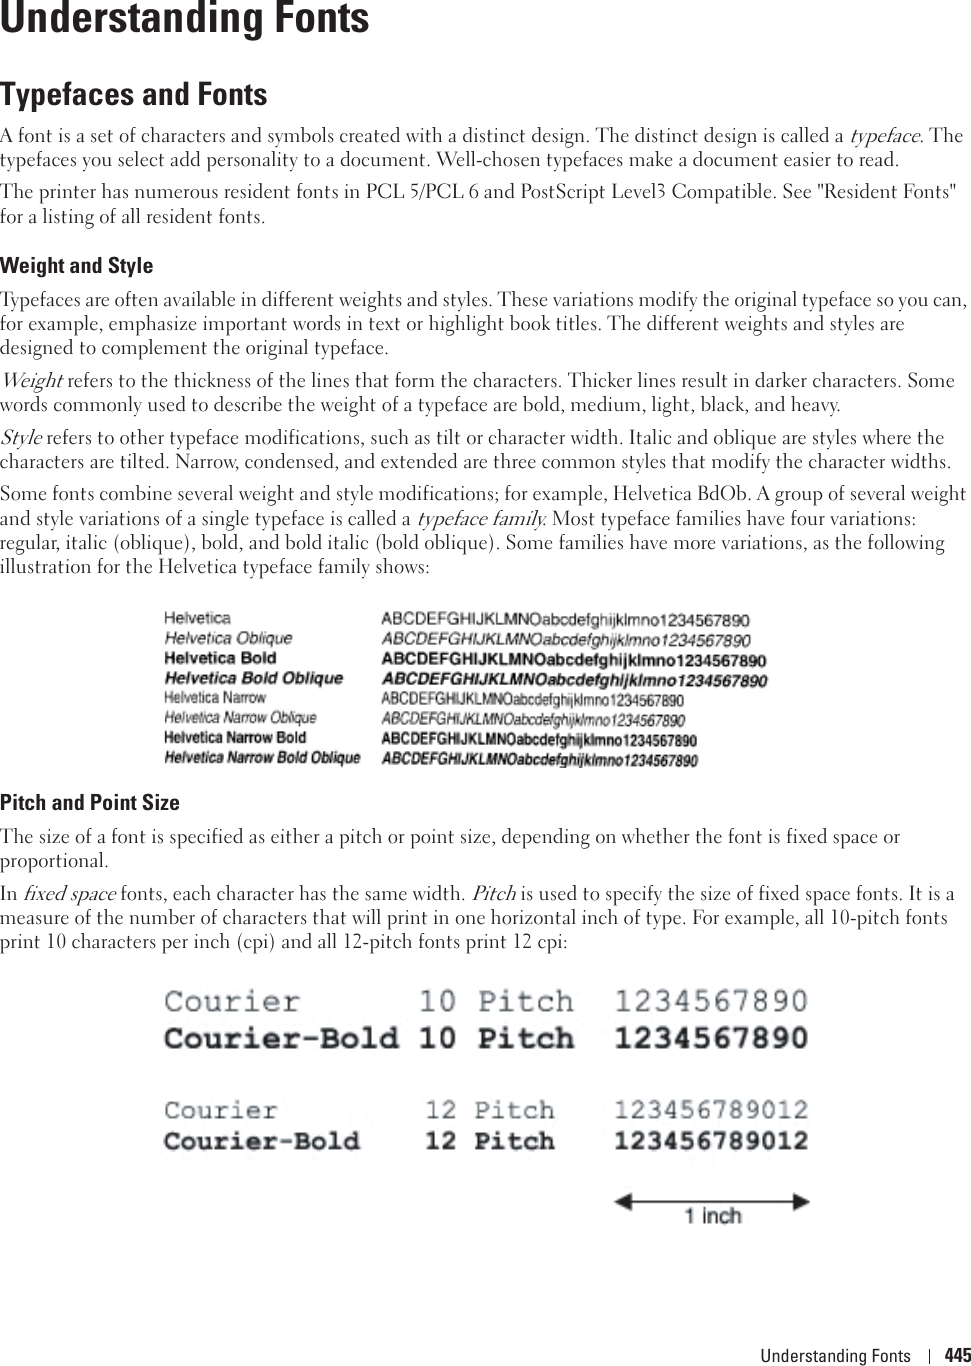 Understanding Fonts 44529Understanding FontsTypefaces and FontsA font is a set of characters and symbols created with a distinct design. The distinct design is called a typeface. The typefaces you select add personality to a document. Well-chosen typefaces make a document easier to read.The printer has numerous resident fonts in PCL 5/PCL 6 and PostScript Level3 Compatible. See &quot;Resident Fonts&quot; for a listing of all resident fonts.Weight and StyleTypefaces are often available in different weights and styles. These variations modify the original typeface so you can, for example, emphasize important words in text or highlight book titles. The different weights and styles are designed to complement the original typeface.Weight refers to the thickness of the lines that form the characters. Thicker lines result in darker characters. Some words commonly used to describe the weight of a typeface are bold, medium, light, black, and heavy.Style refers to other typeface modifications, such as tilt or character width. Italic and oblique are styles where the characters are tilted. Narrow, condensed, and extended are three common styles that modify the character widths.Some fonts combine several weight and style modifications; for example, Helvetica BdOb. A group of several weight and style variations of a single typeface is called a typeface family. Most typeface families have four variations: regular, italic (oblique), bold, and bold italic (bold oblique). Some families have more variations, as the following illustration for the Helvetica typeface family shows:Pitch and Point SizeThe size of a font is specified as either a pitch or point size, depending on whether the font is fixed space or proportional.In fixed space fonts, each character has the same width. Pitch is used to specify the size of fixed space fonts. It is a measure of the number of characters that will print in one horizontal inch of type. For example, all 10-pitch fonts print 10 characters per inch (cpi) and all 12-pitch fonts print 12 cpi: